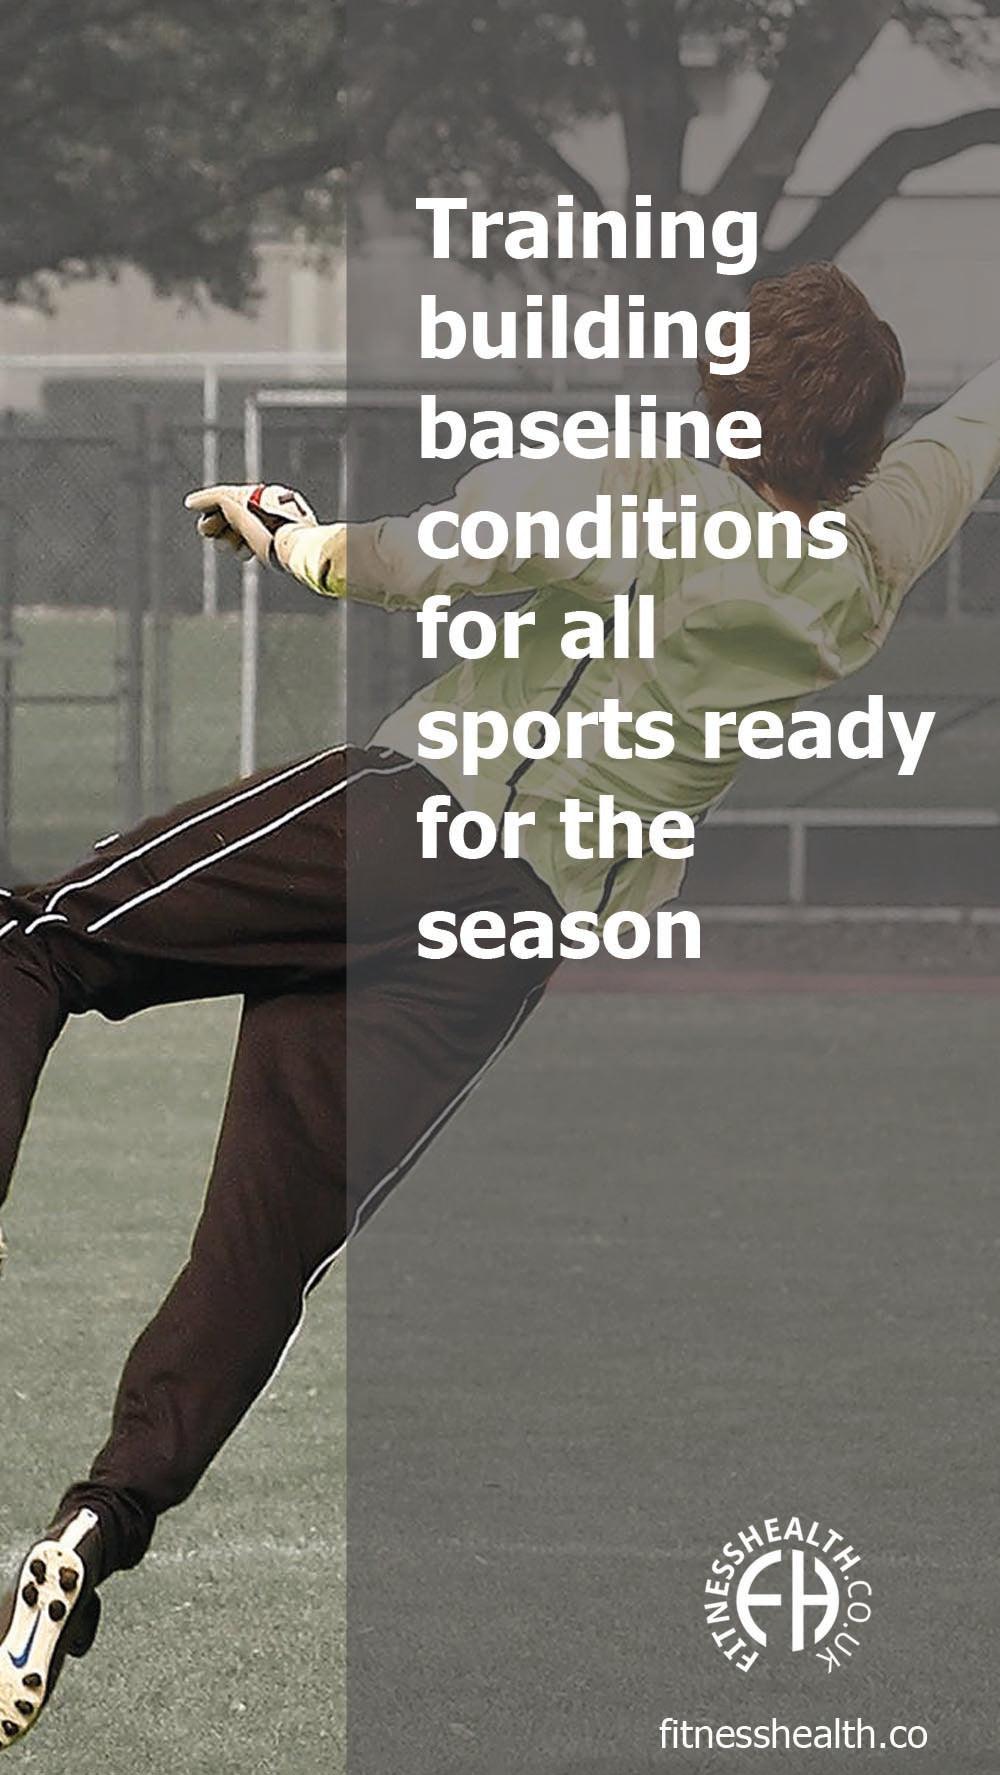 Training building baseline conditions for all sports ready for the season - Fitness Health 